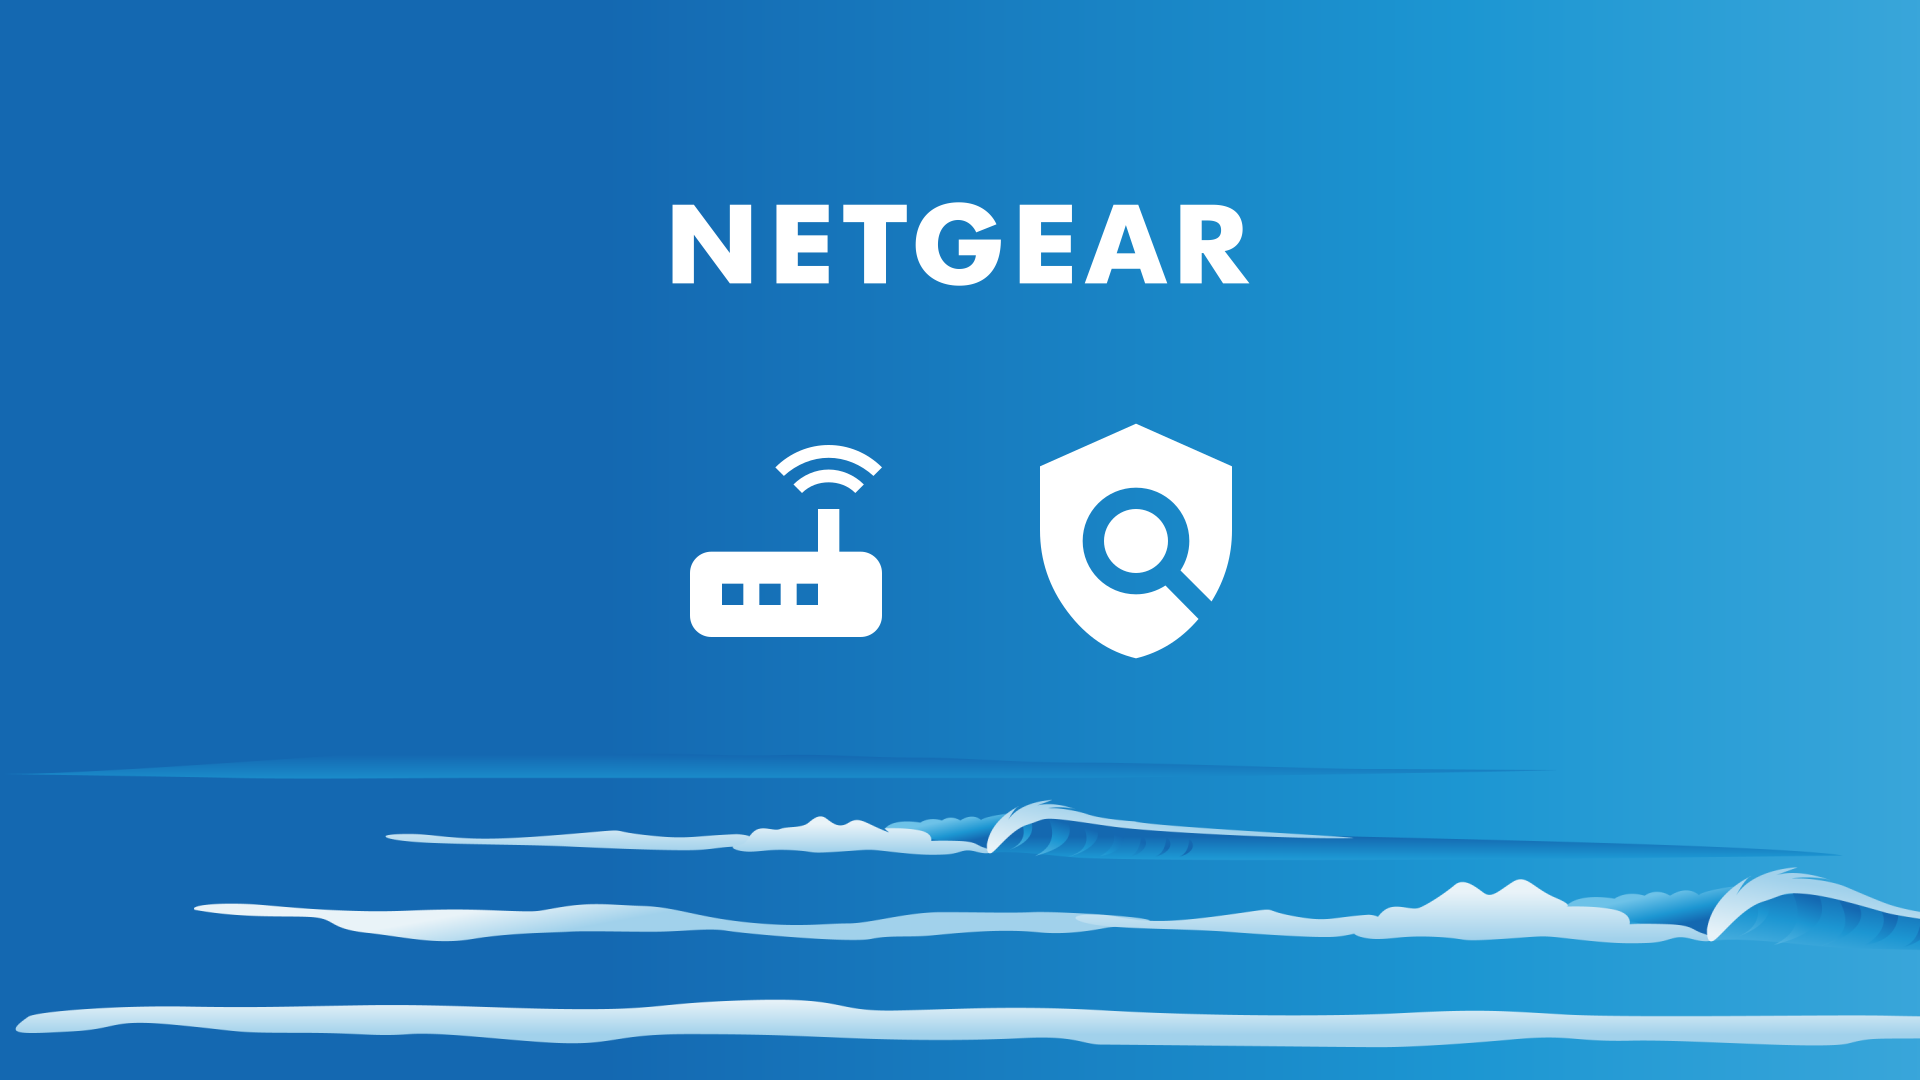 Sea background with NETGEAR logo and wireless router icon